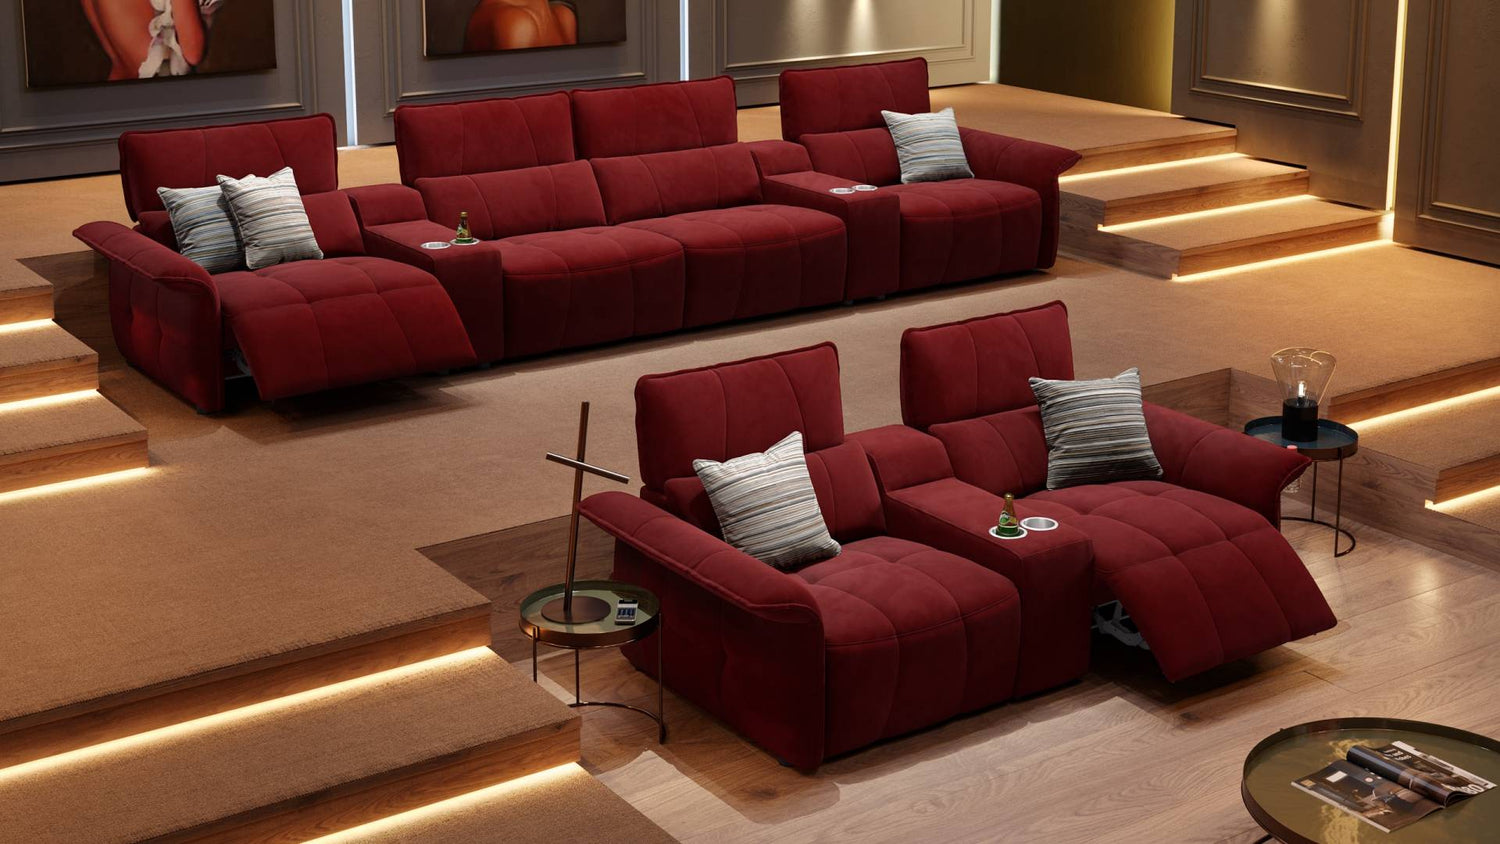 Comfort First: Choosing the Perfect Sofa for Your Home Theater